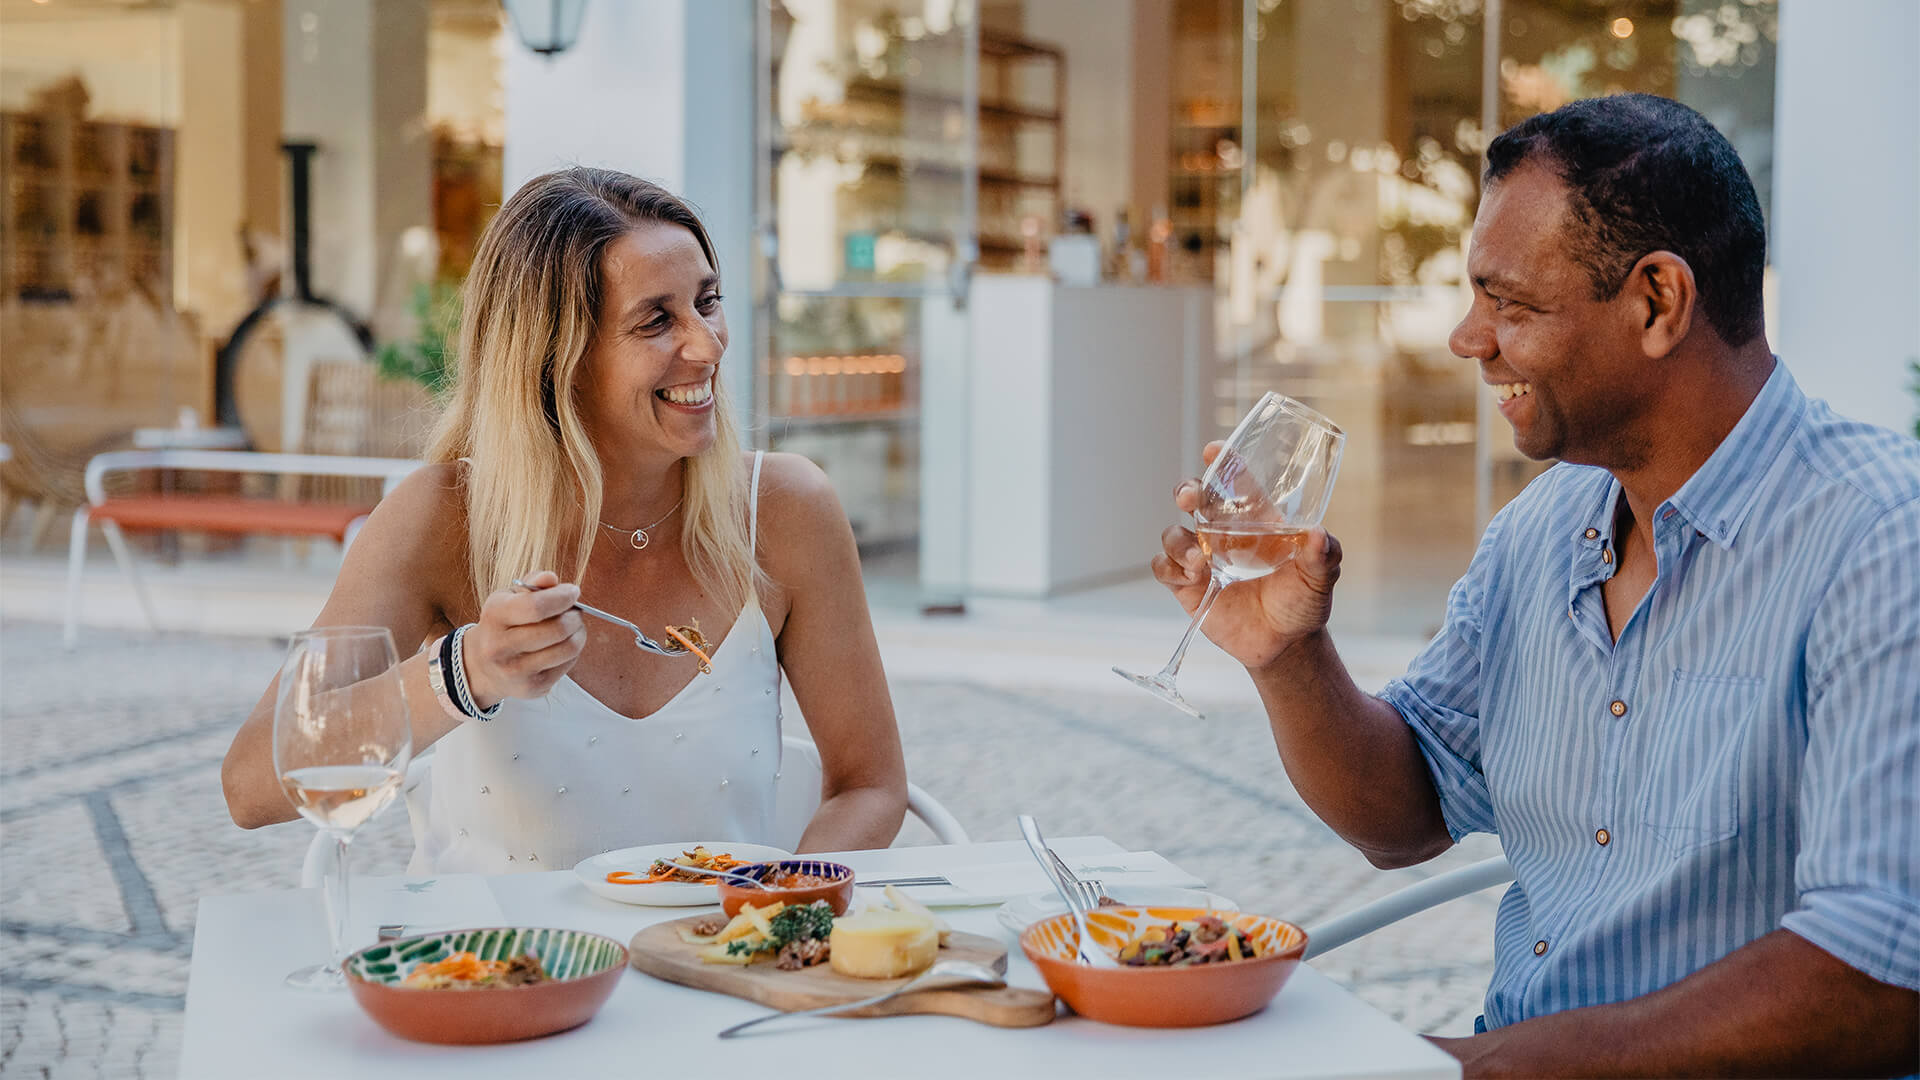 man and woman sitting at table eating food and drinking wine